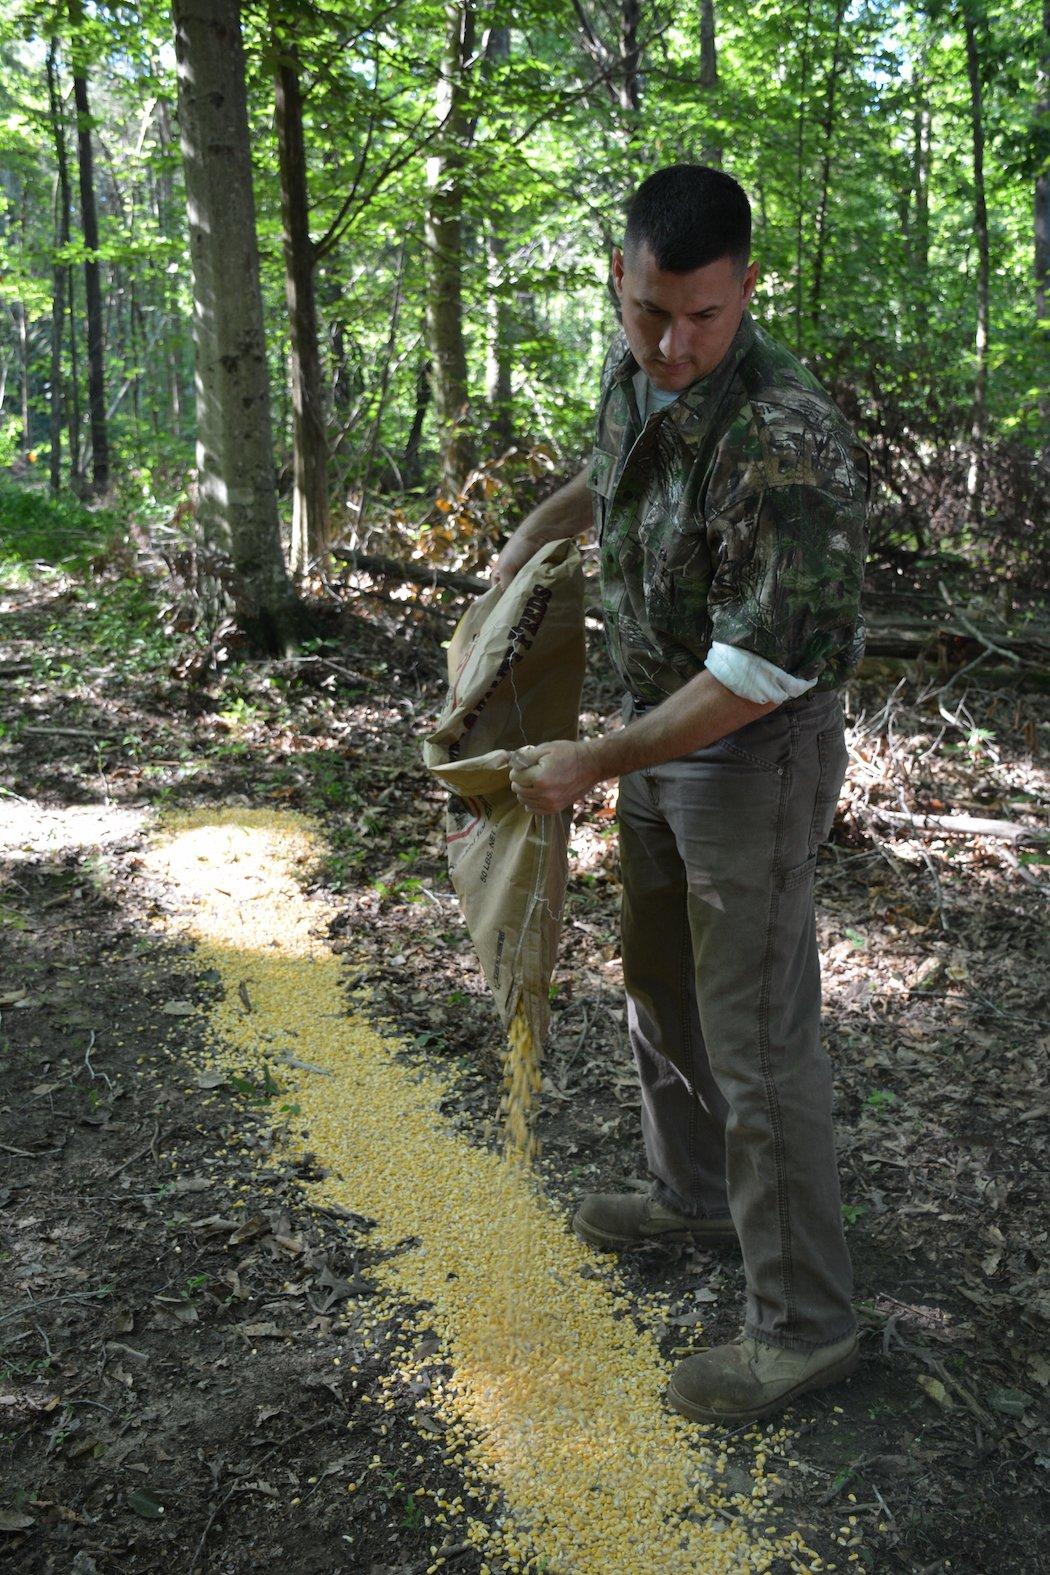 Check your local feeding and baiting laws before conducting a survey. (Richard Hines photo)